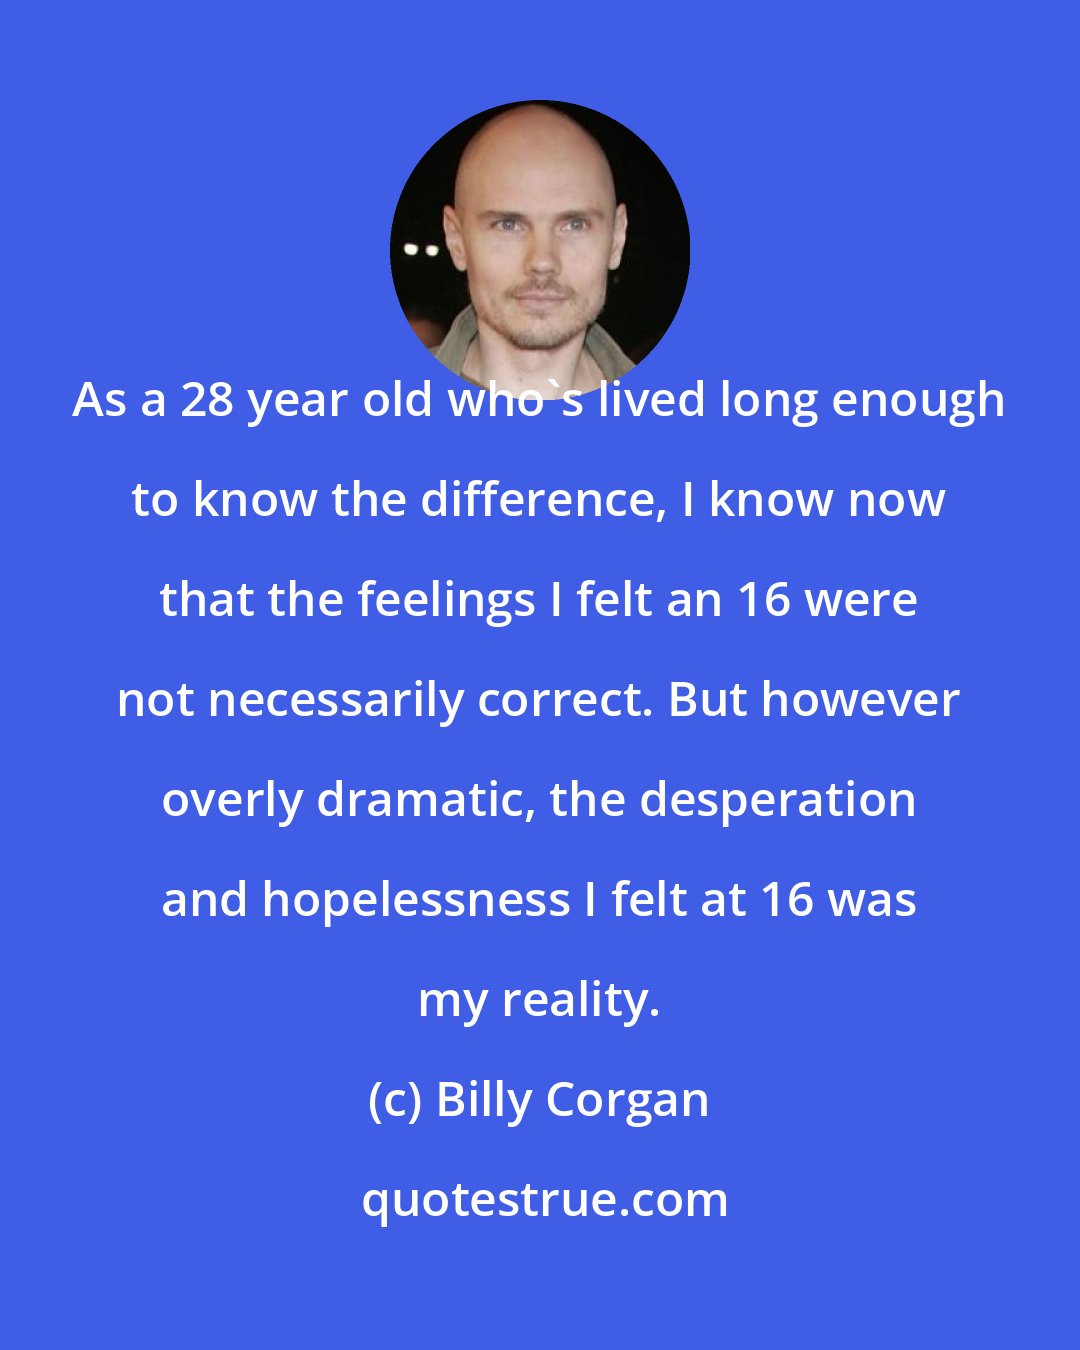 Billy Corgan: As a 28 year old who's lived long enough to know the difference, I know now that the feelings I felt an 16 were not necessarily correct. But however overly dramatic, the desperation and hopelessness I felt at 16 was my reality.